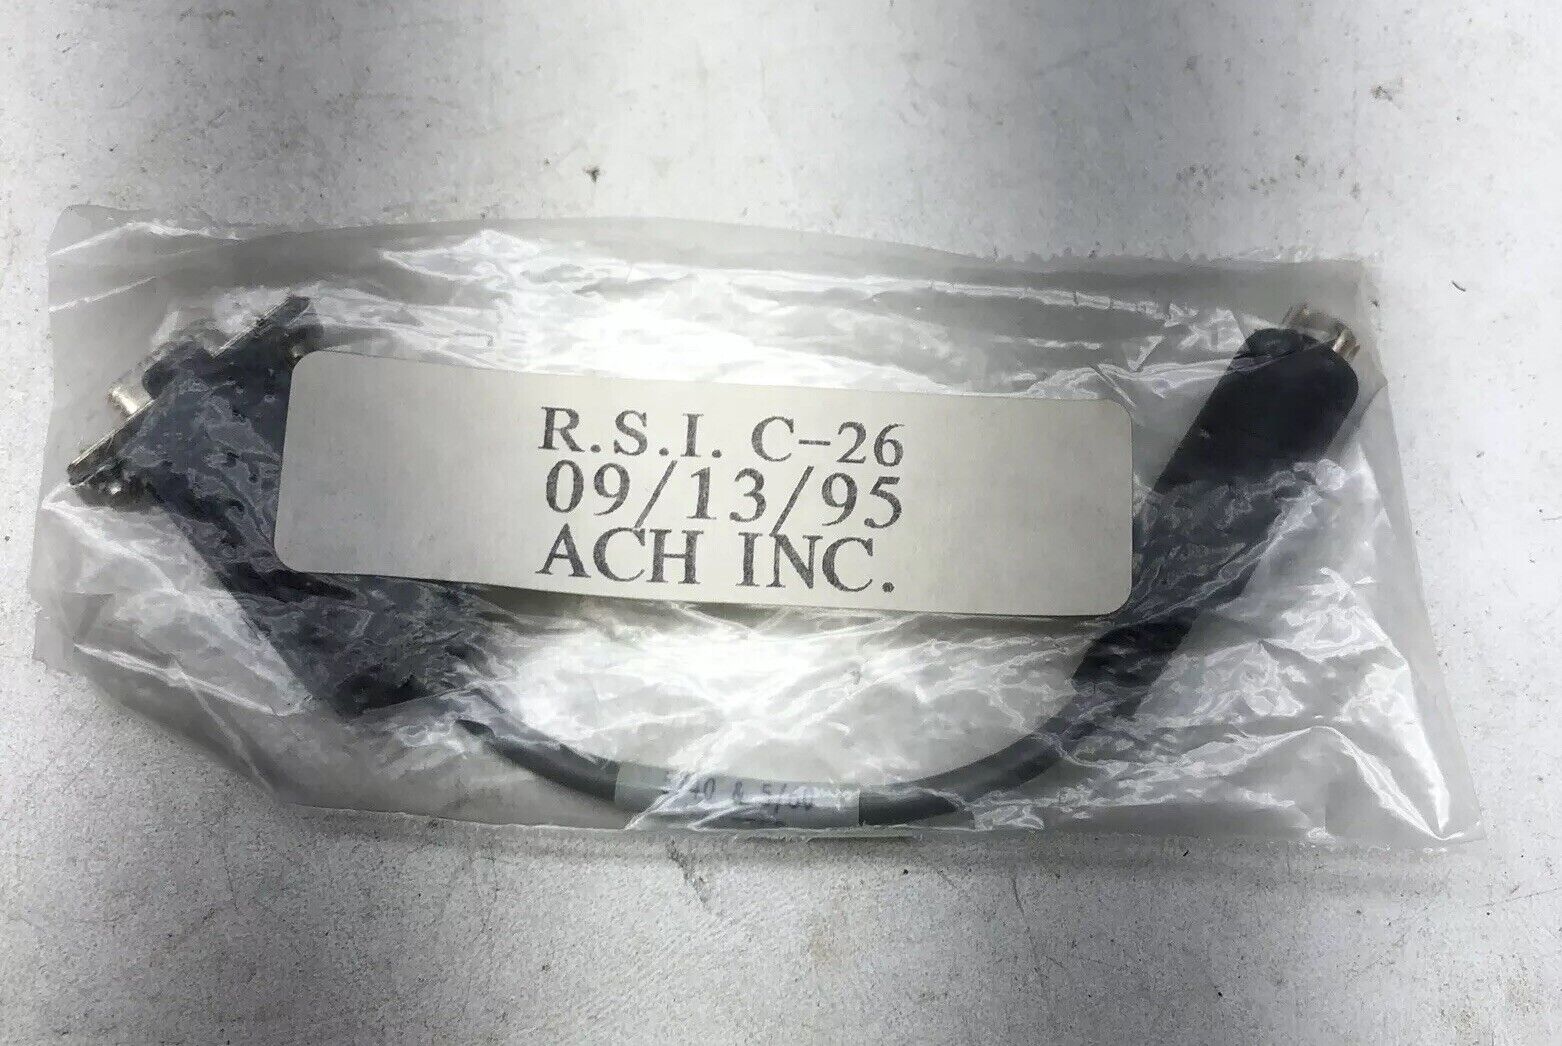 NEW SEALED R.S.I. C-26 ALLEN BRADLEY PLC 5/40 TO 5/60 CABLE / ADAPTER